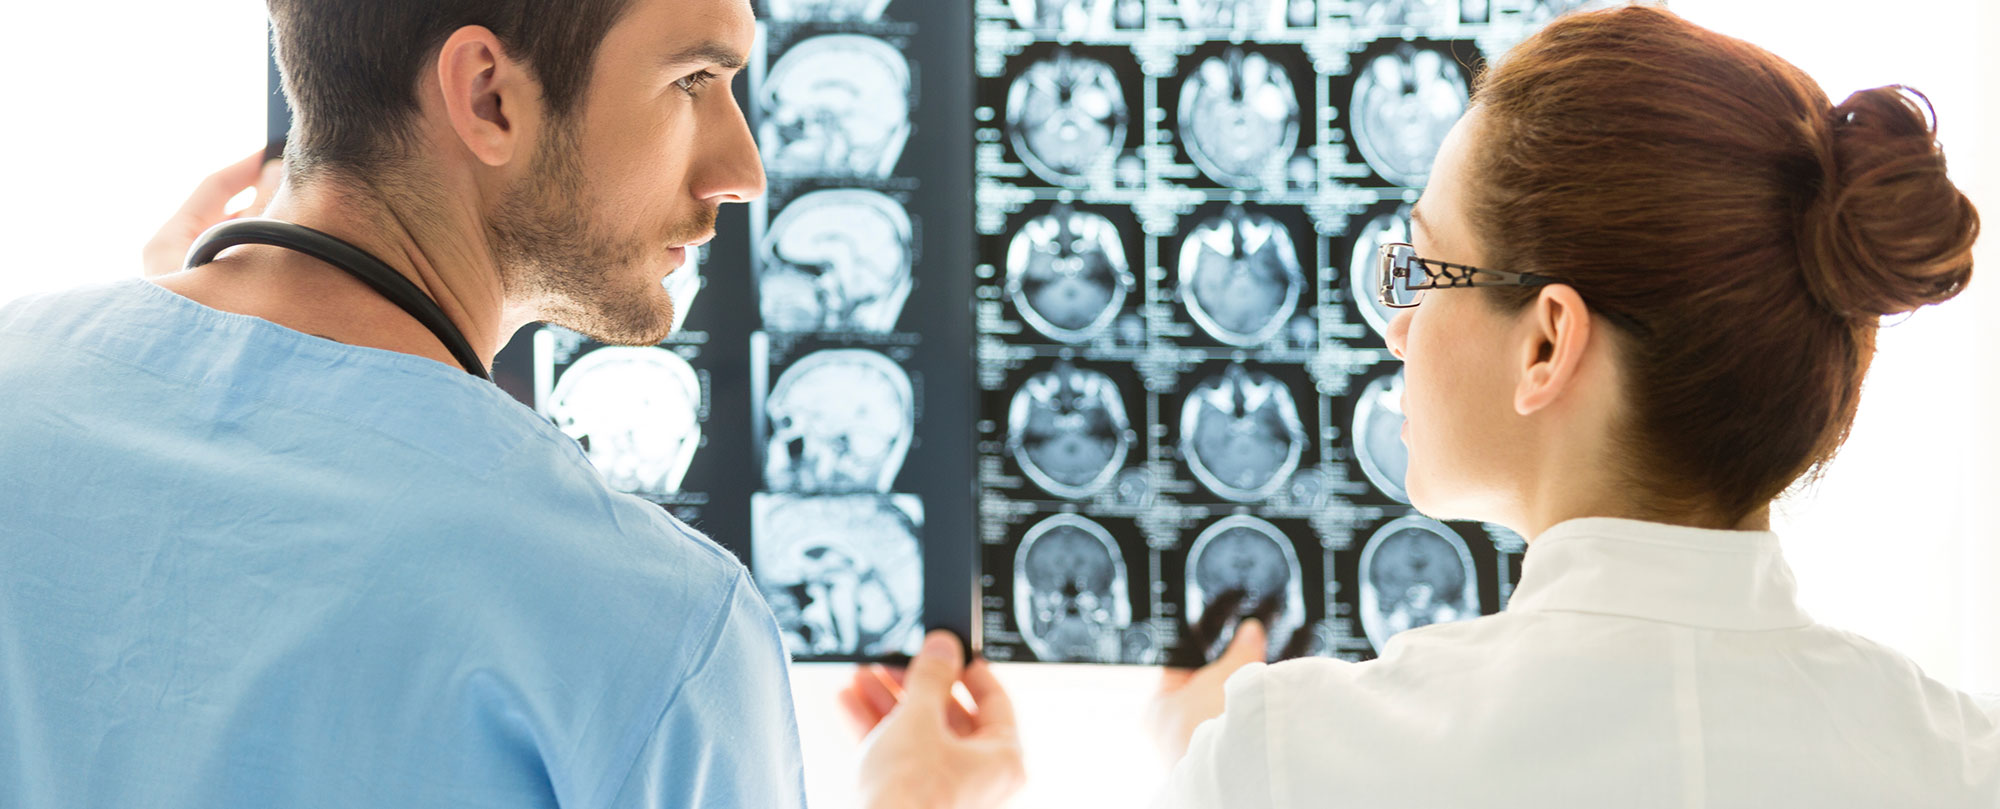 physicians looking at brain scan images